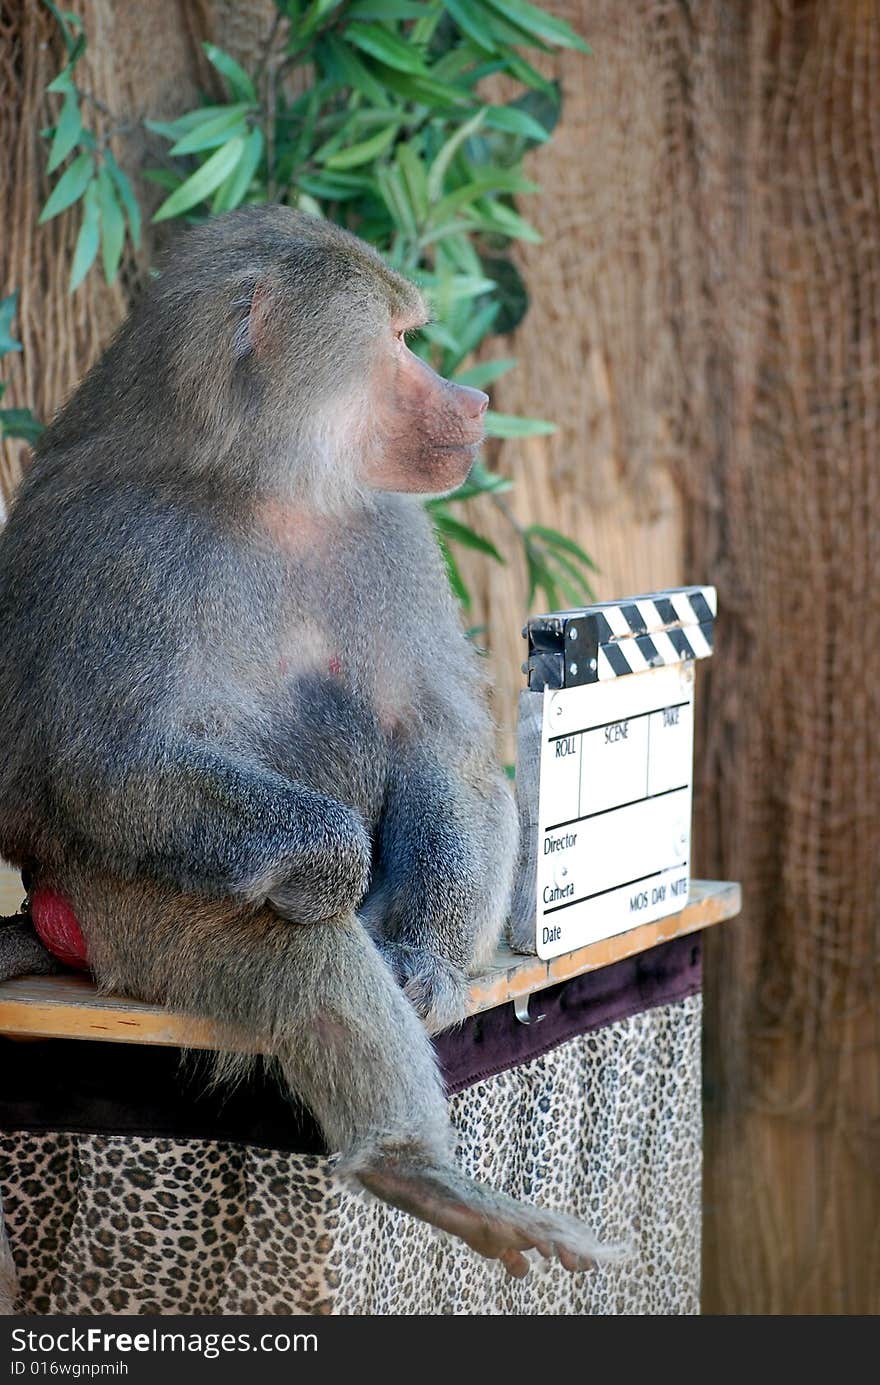 Trained baboon playing director in a scene